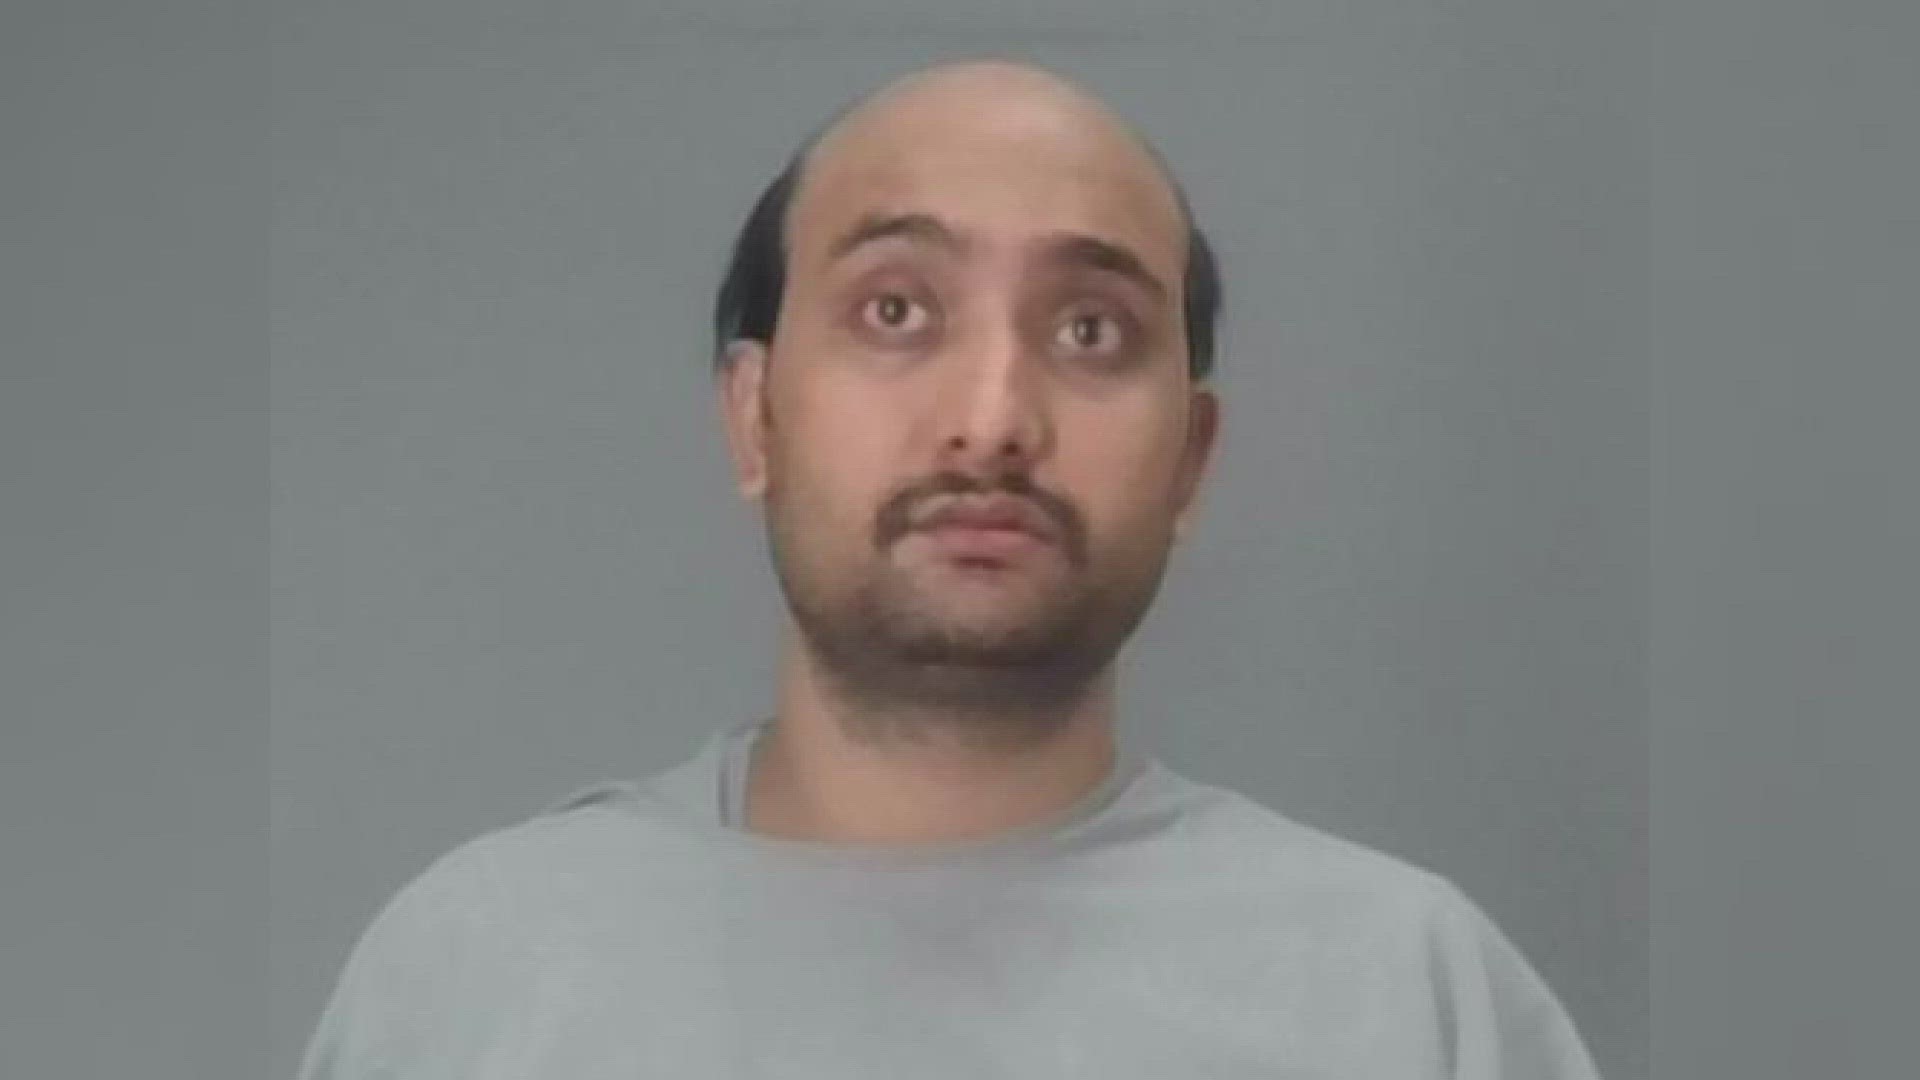 James Rimal is facing several charges, including murder, in connection to the death of his wife, Chandra Maya Poudel-Rimal.